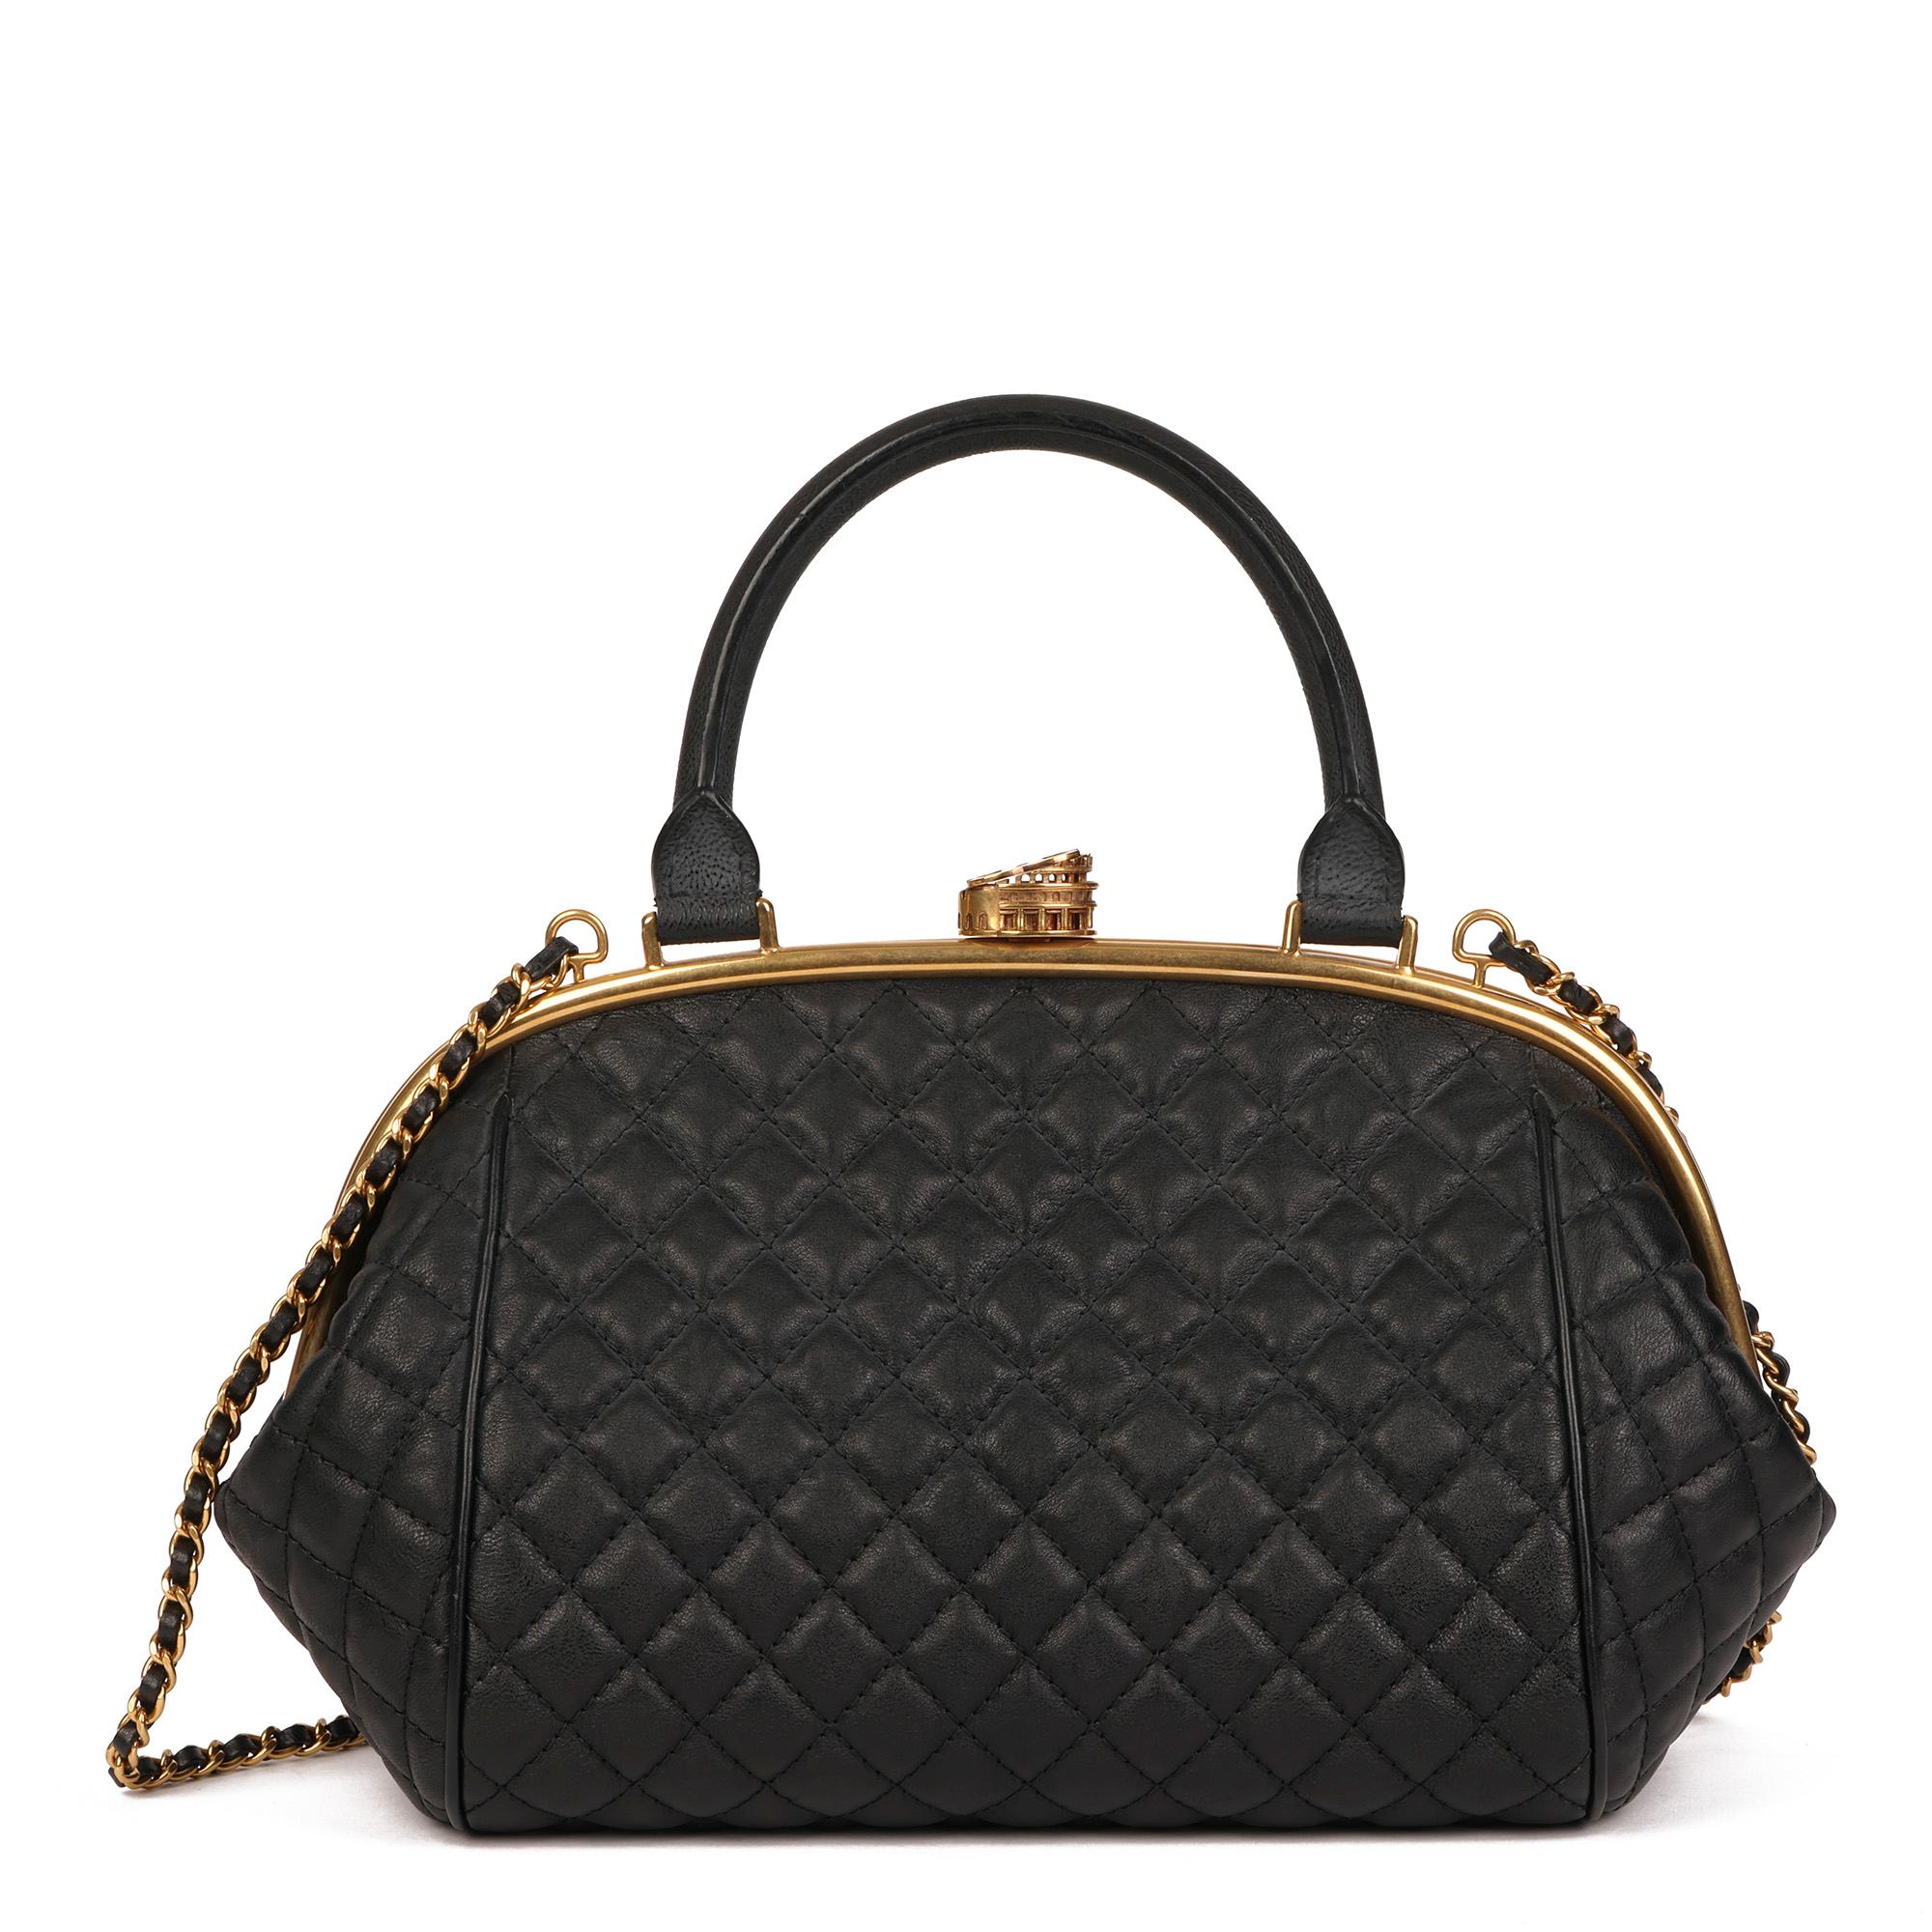 Women's 2016 Chanel Black Quilted Calfskin Leather Paris in Rome Colosseum Kiss Lock Bag